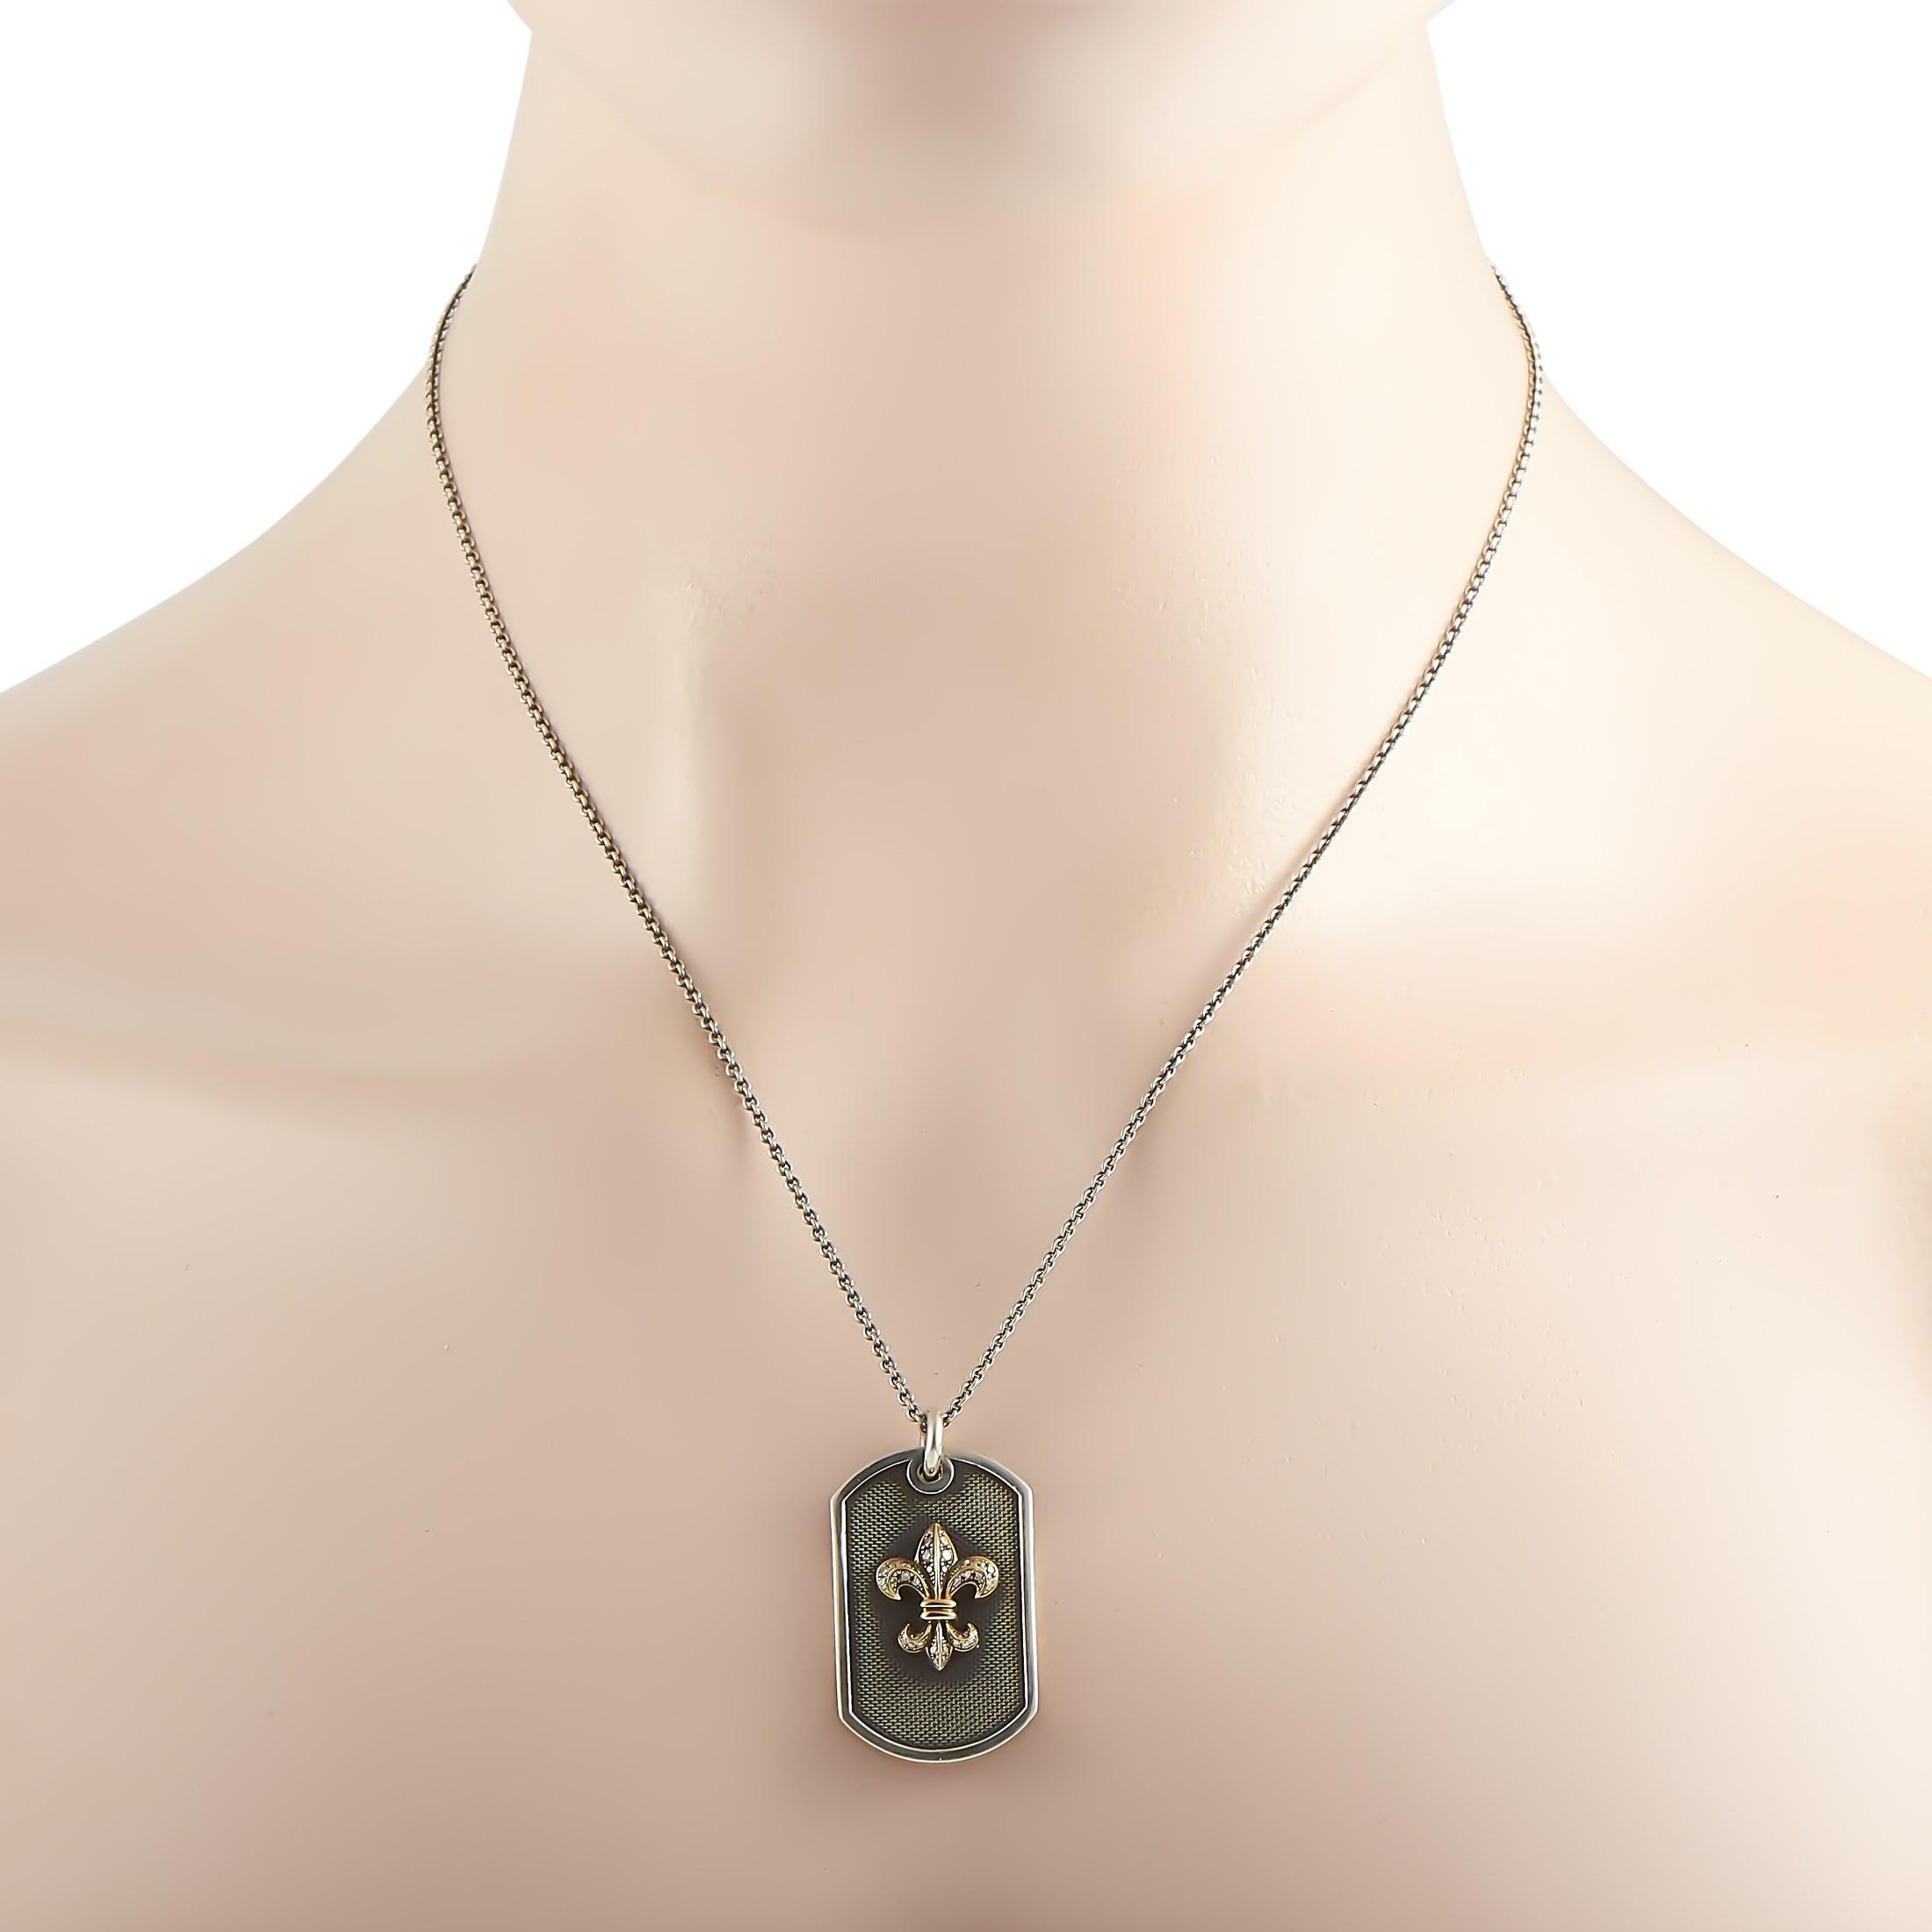 This limited edition King Baby necklace is made out of sterling silver and 18K yellow gold and embellished with diamonds. The necklace is presented with a 23” chain and boasts a 1.50” by 0.75” dog tag pendant with a fleur-de-lis detail. This item